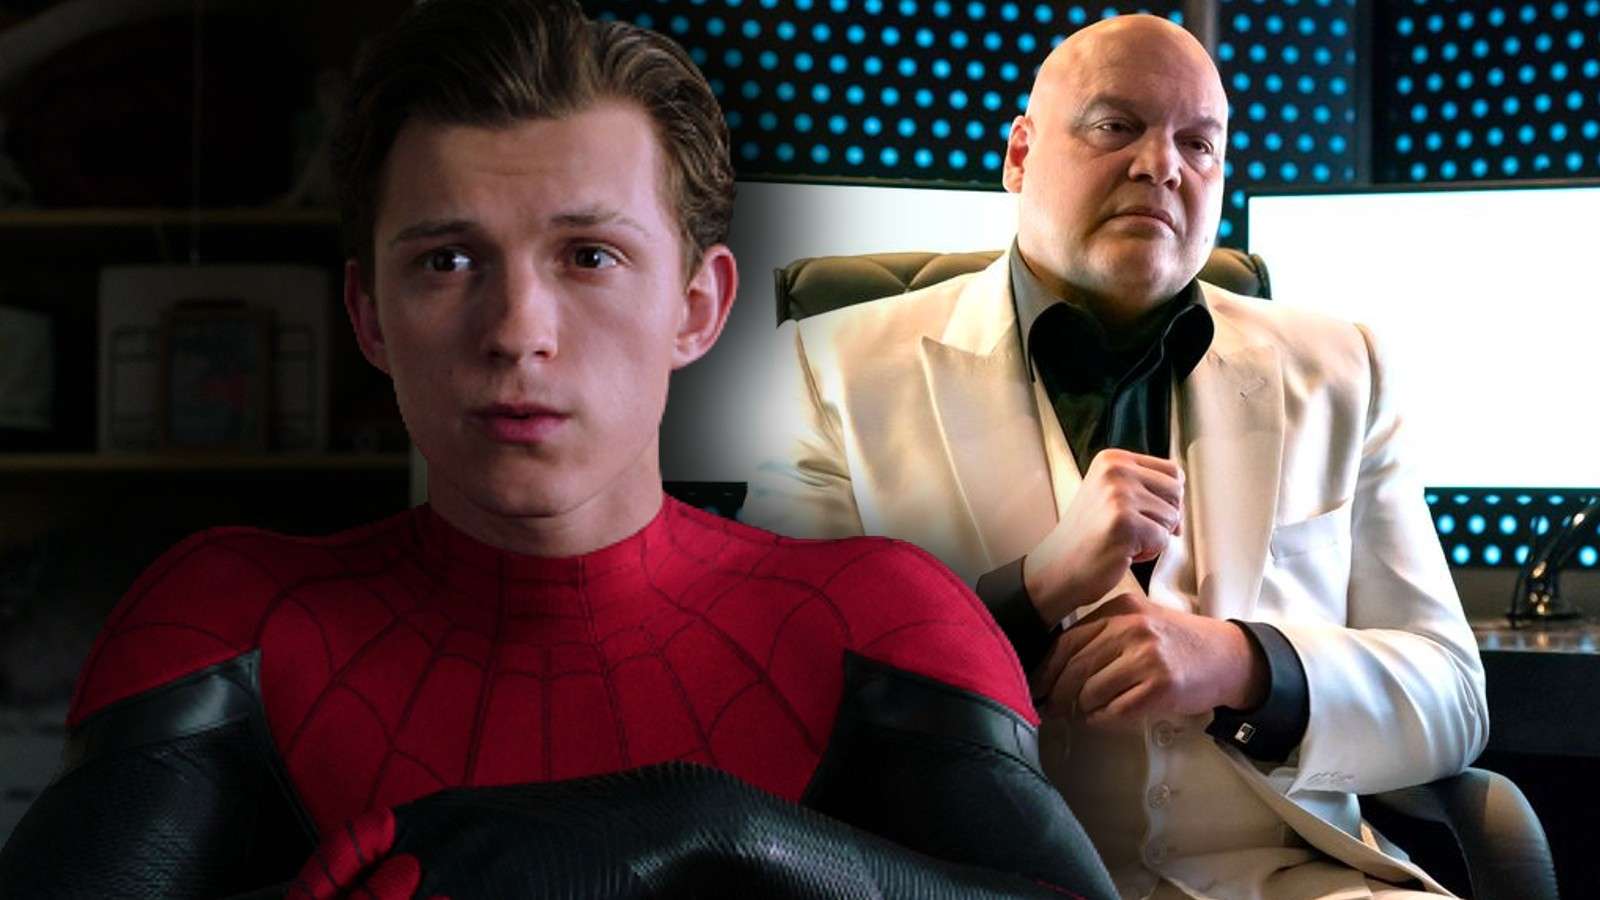 Tom Holland as Spider-Man and Vincent D'Onofrio as Kingpin, who's rumored to appear in Spider-Man 4